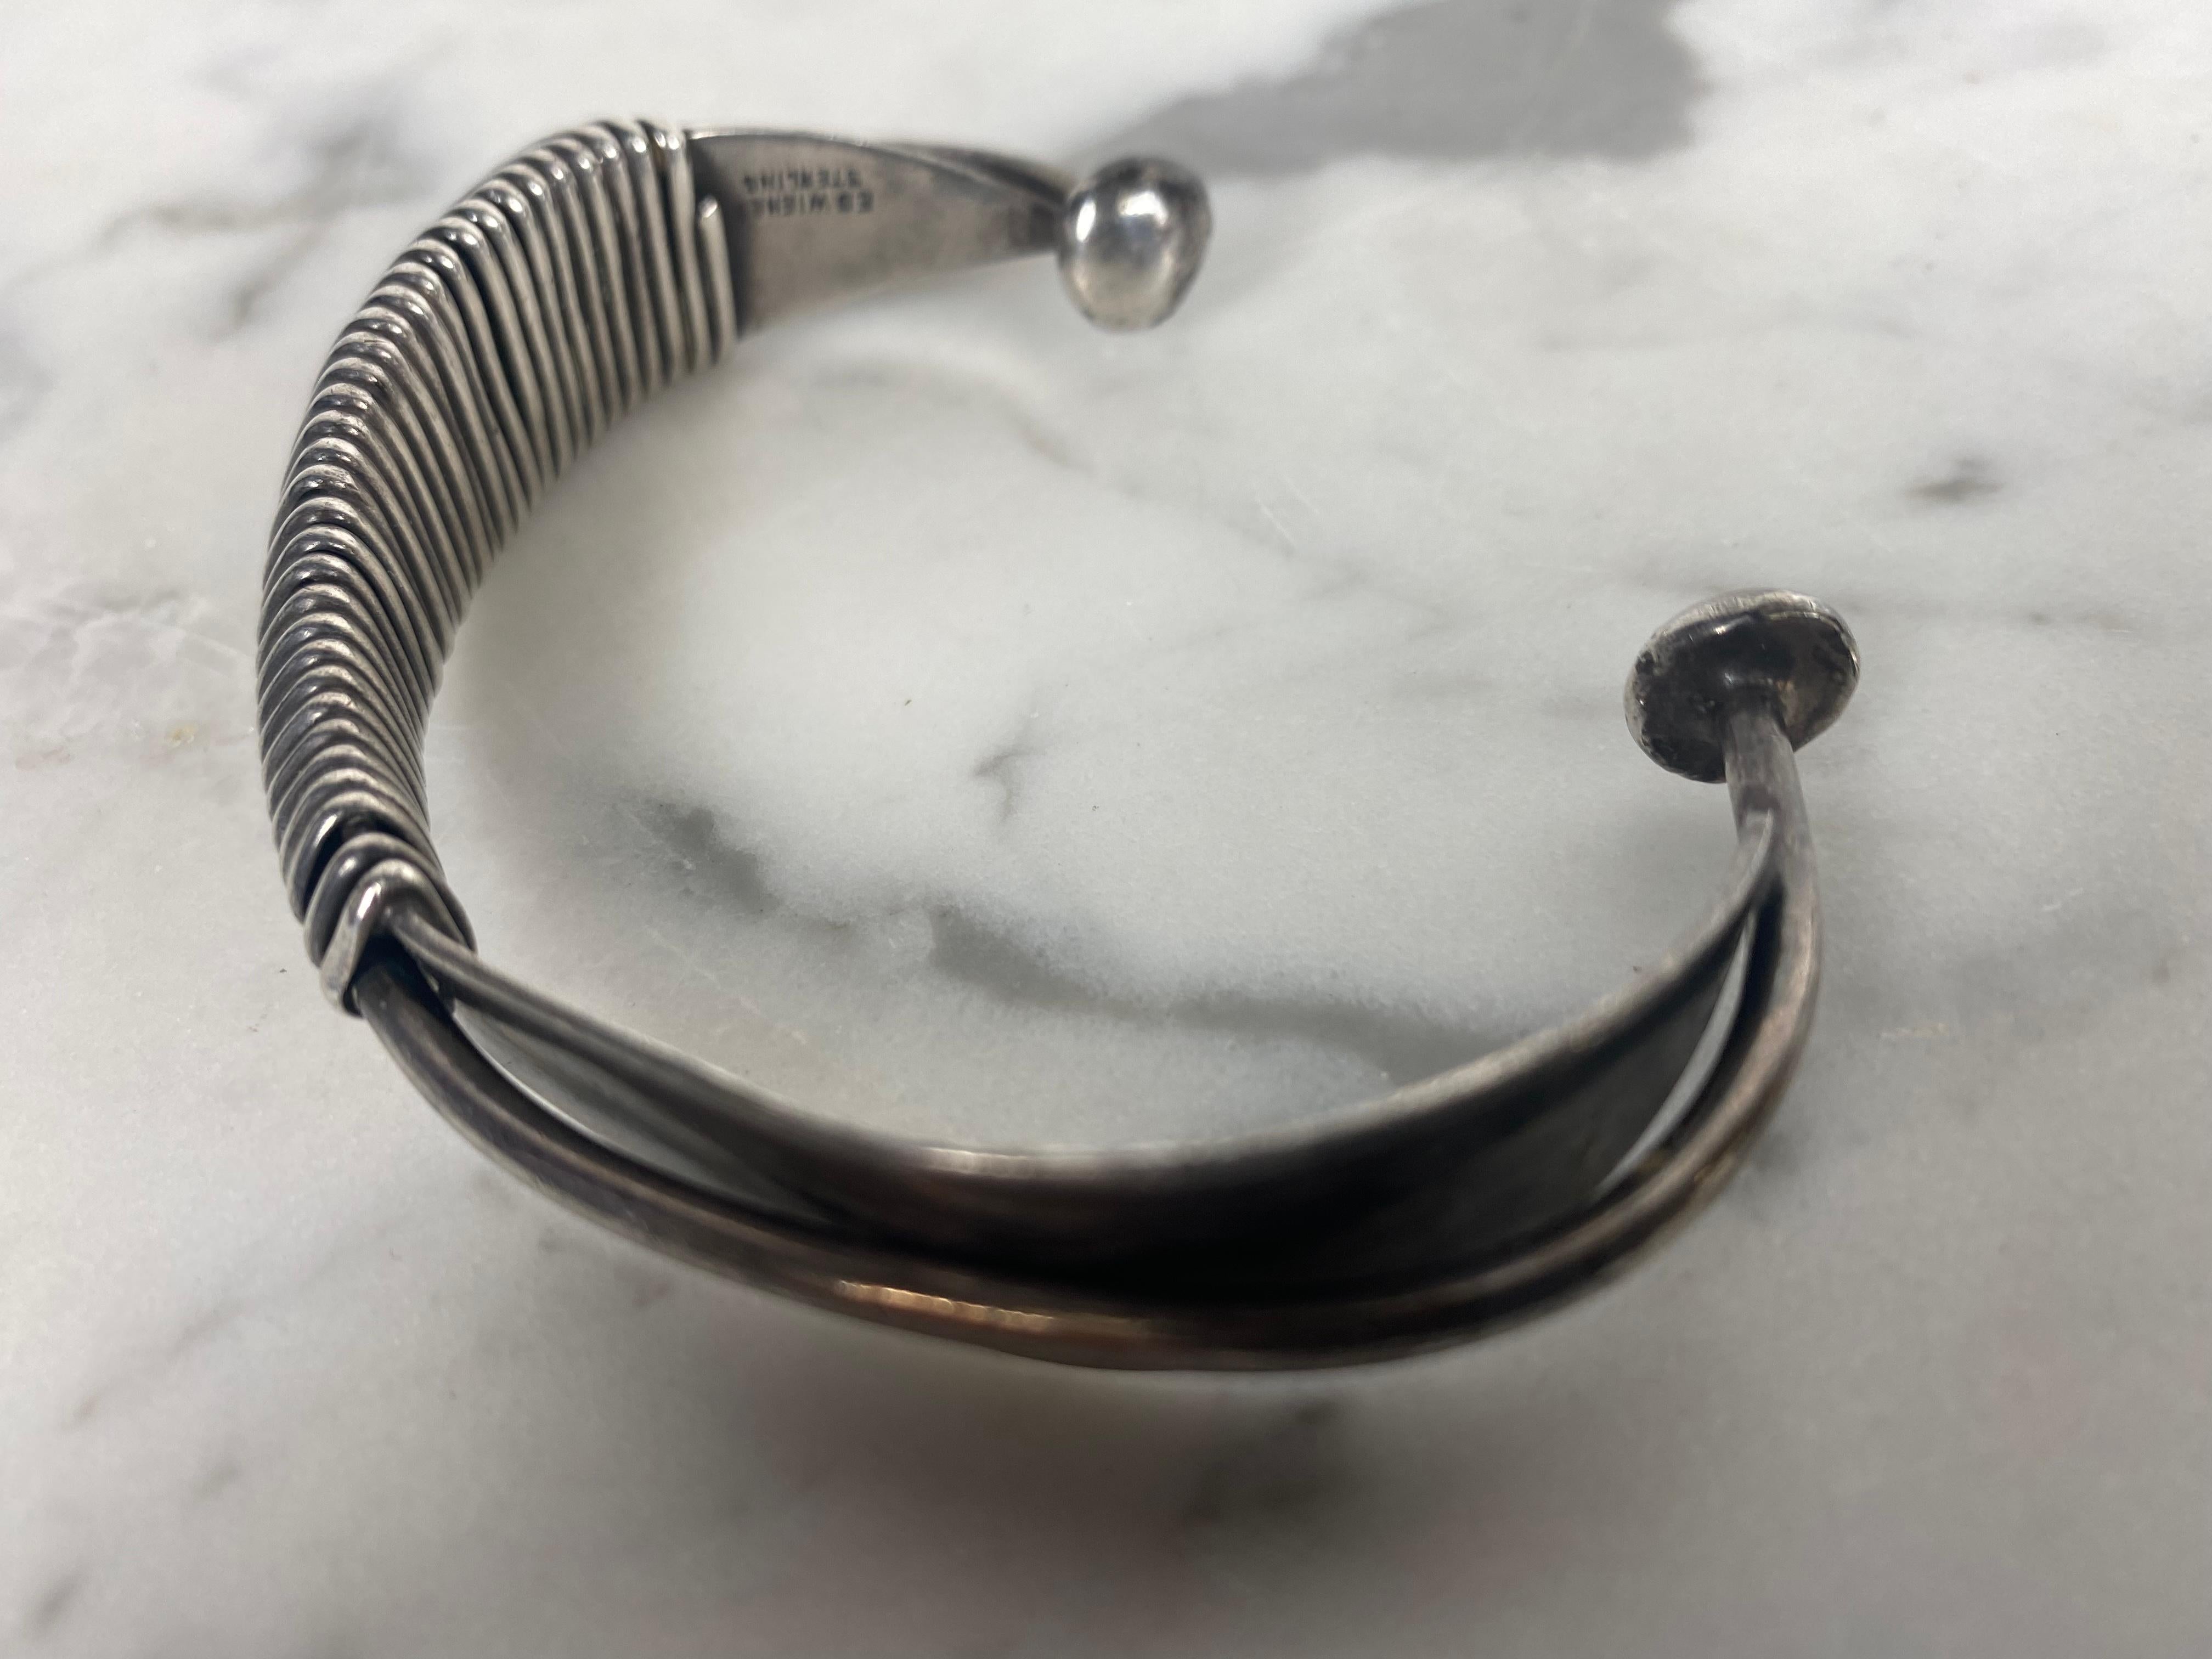 This modernist sculptural piece is one of Wiener's first creations as a jeweler-artist, in New York City, circa 1954.This cuff bracelet is composed of two simple aerodynamic pieces with sinuous curved shapes wrapped by an infinite wire, which in